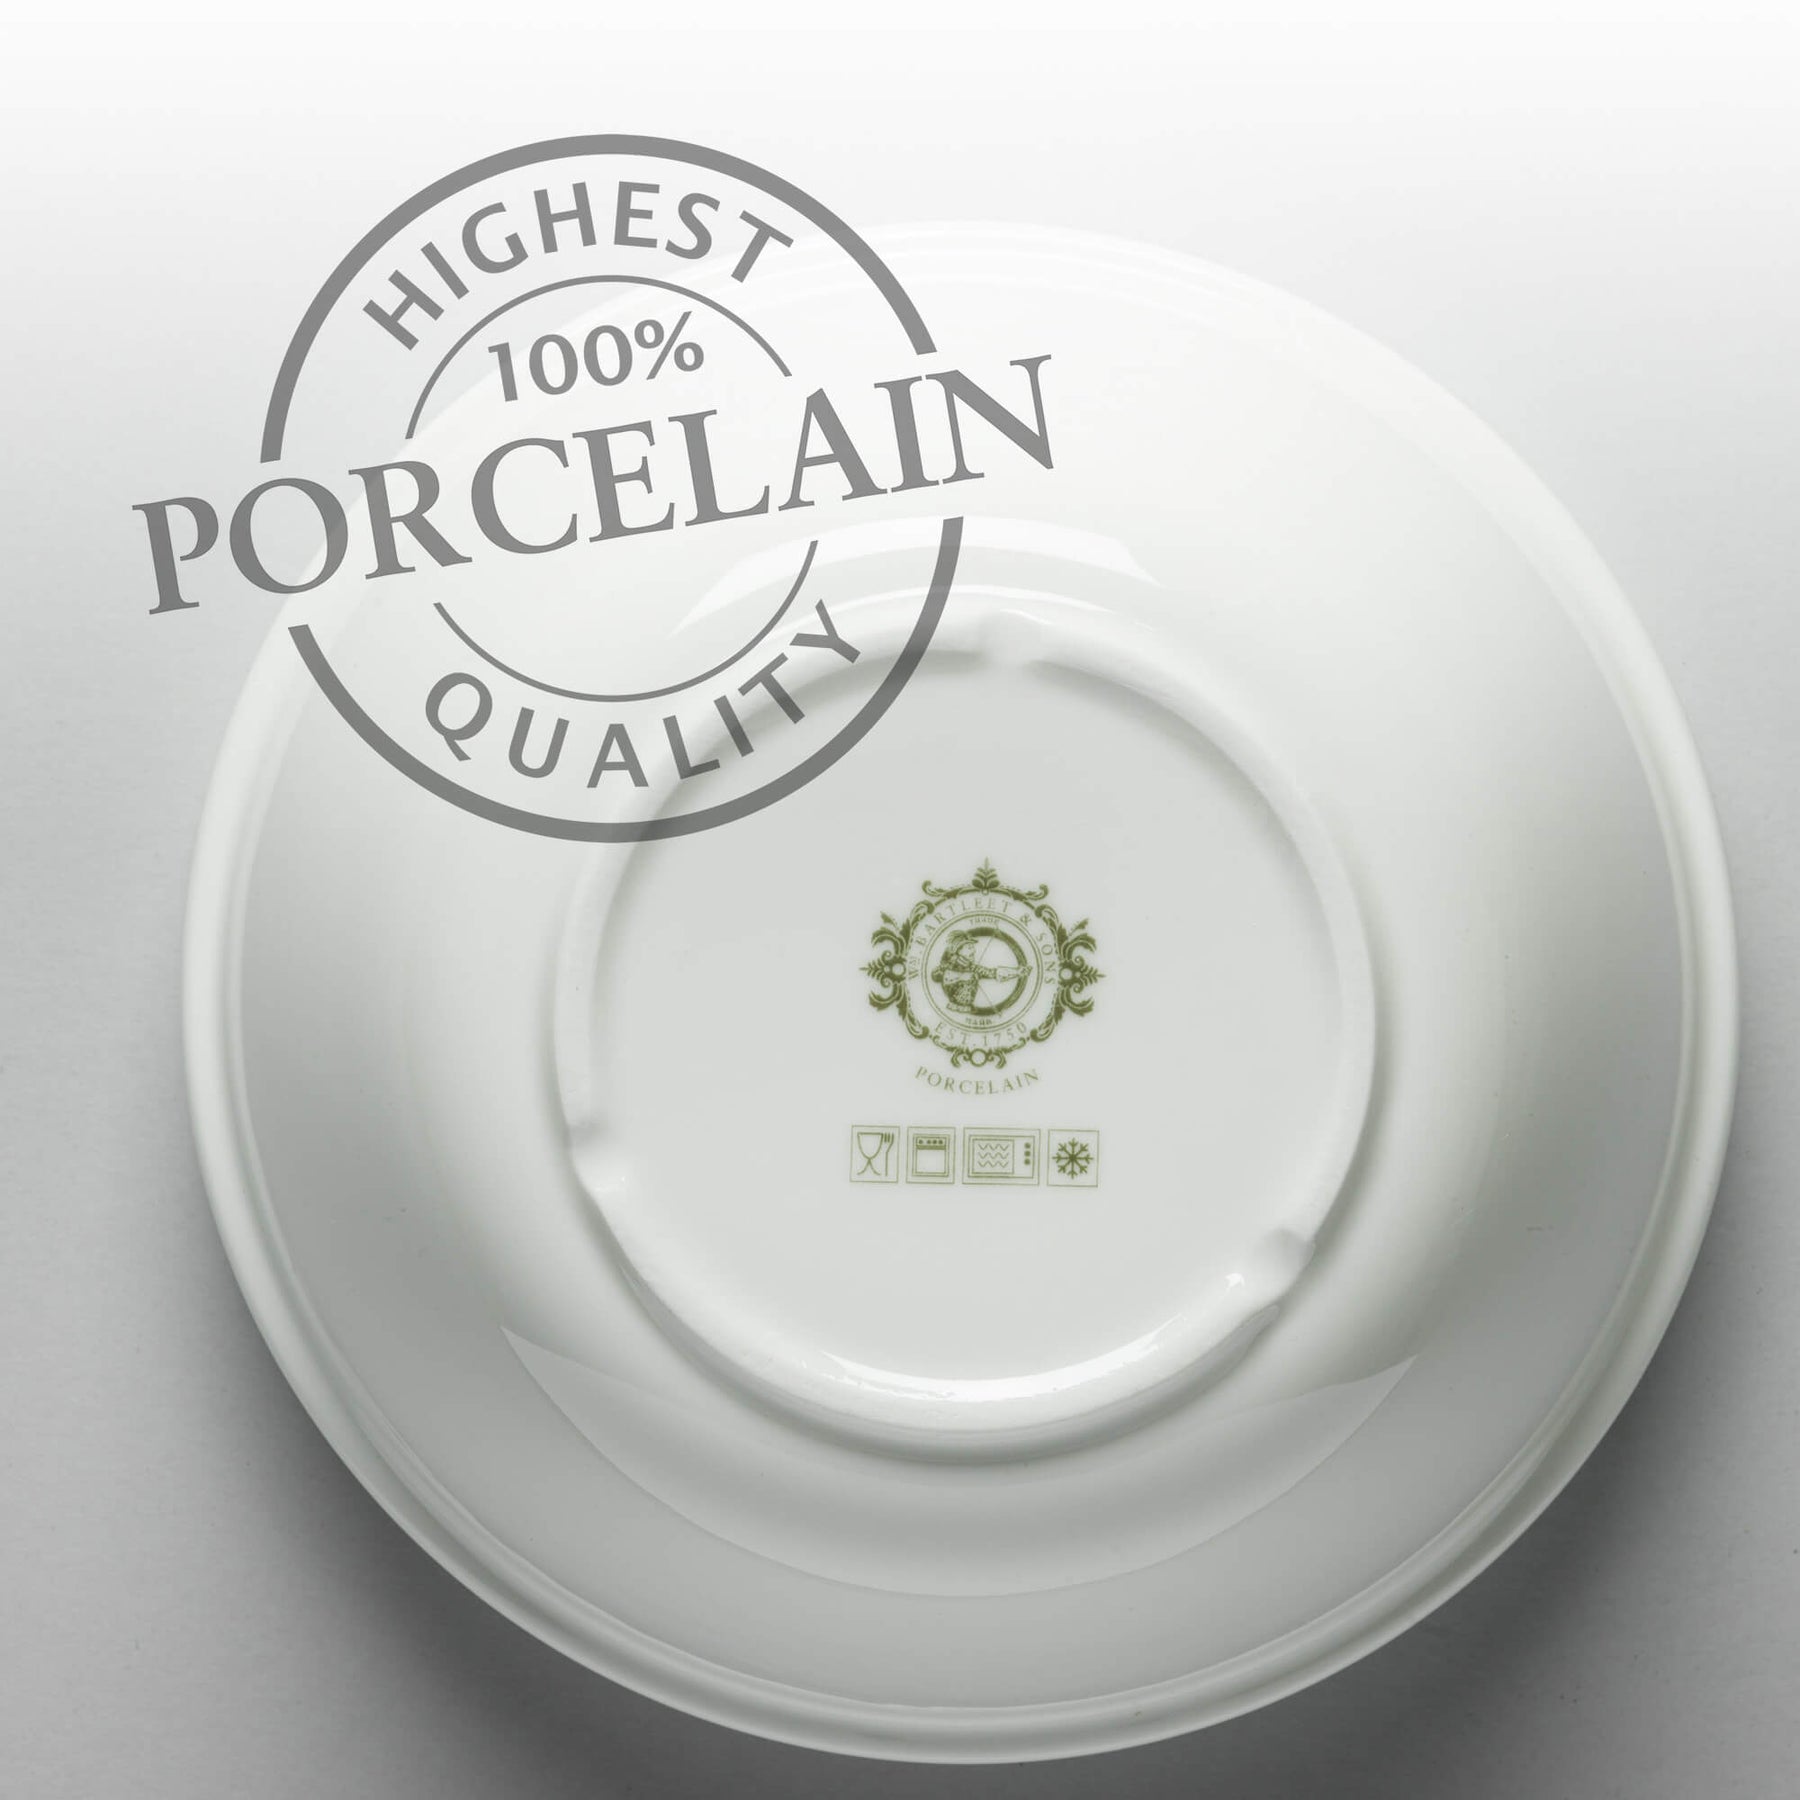 Porcelain Pudding Basin, Available in 5 Sizes